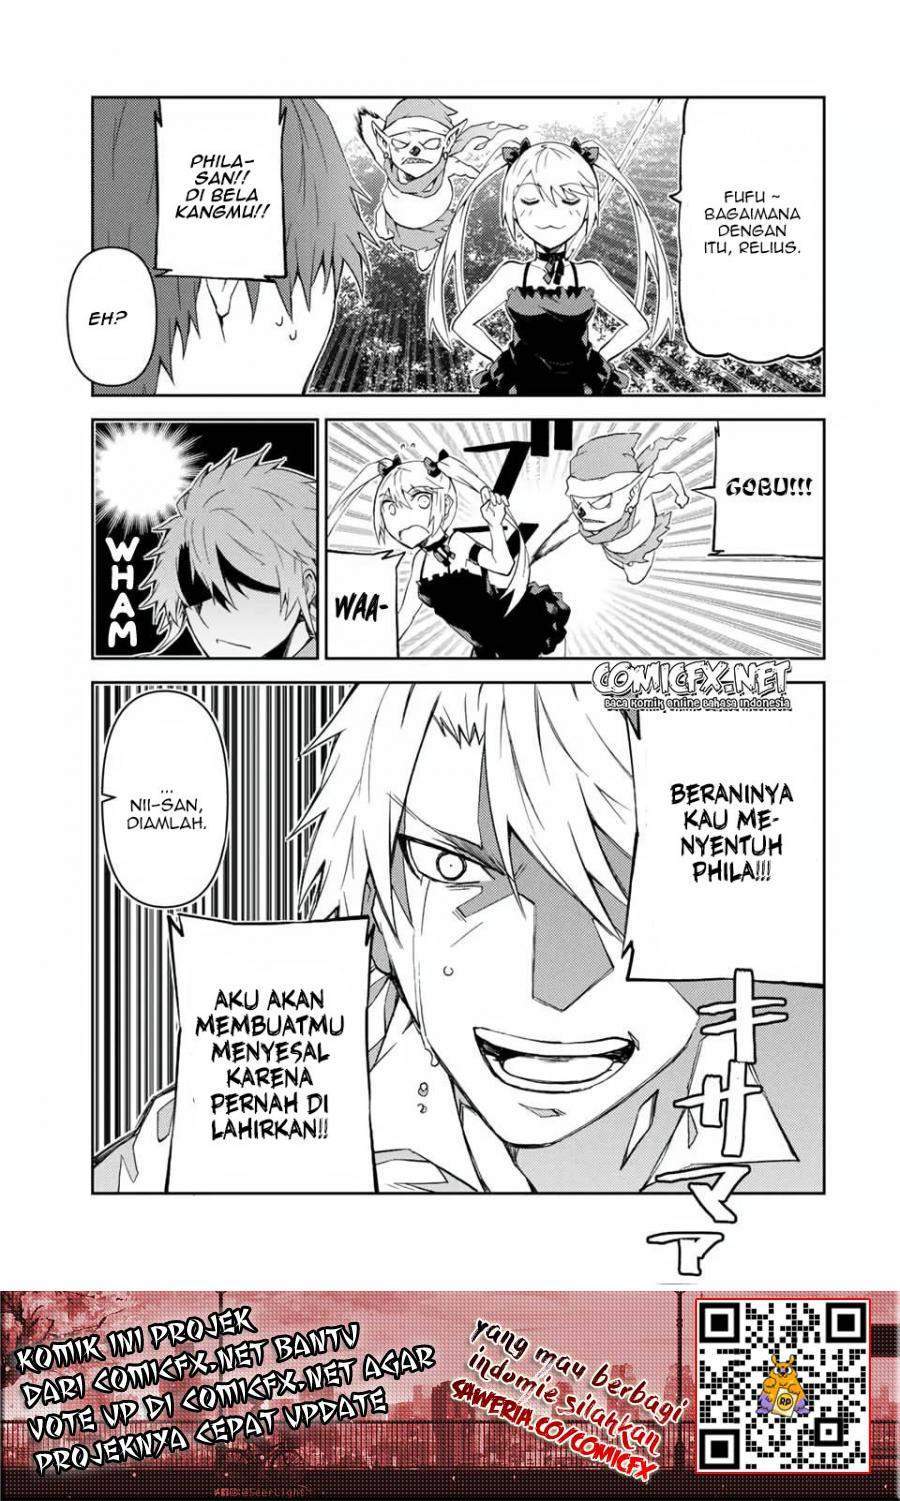 The Weakest Occupation “Blacksmith,” but It’s Actually the Strongest Chapter 18 Bahasa Indonesia